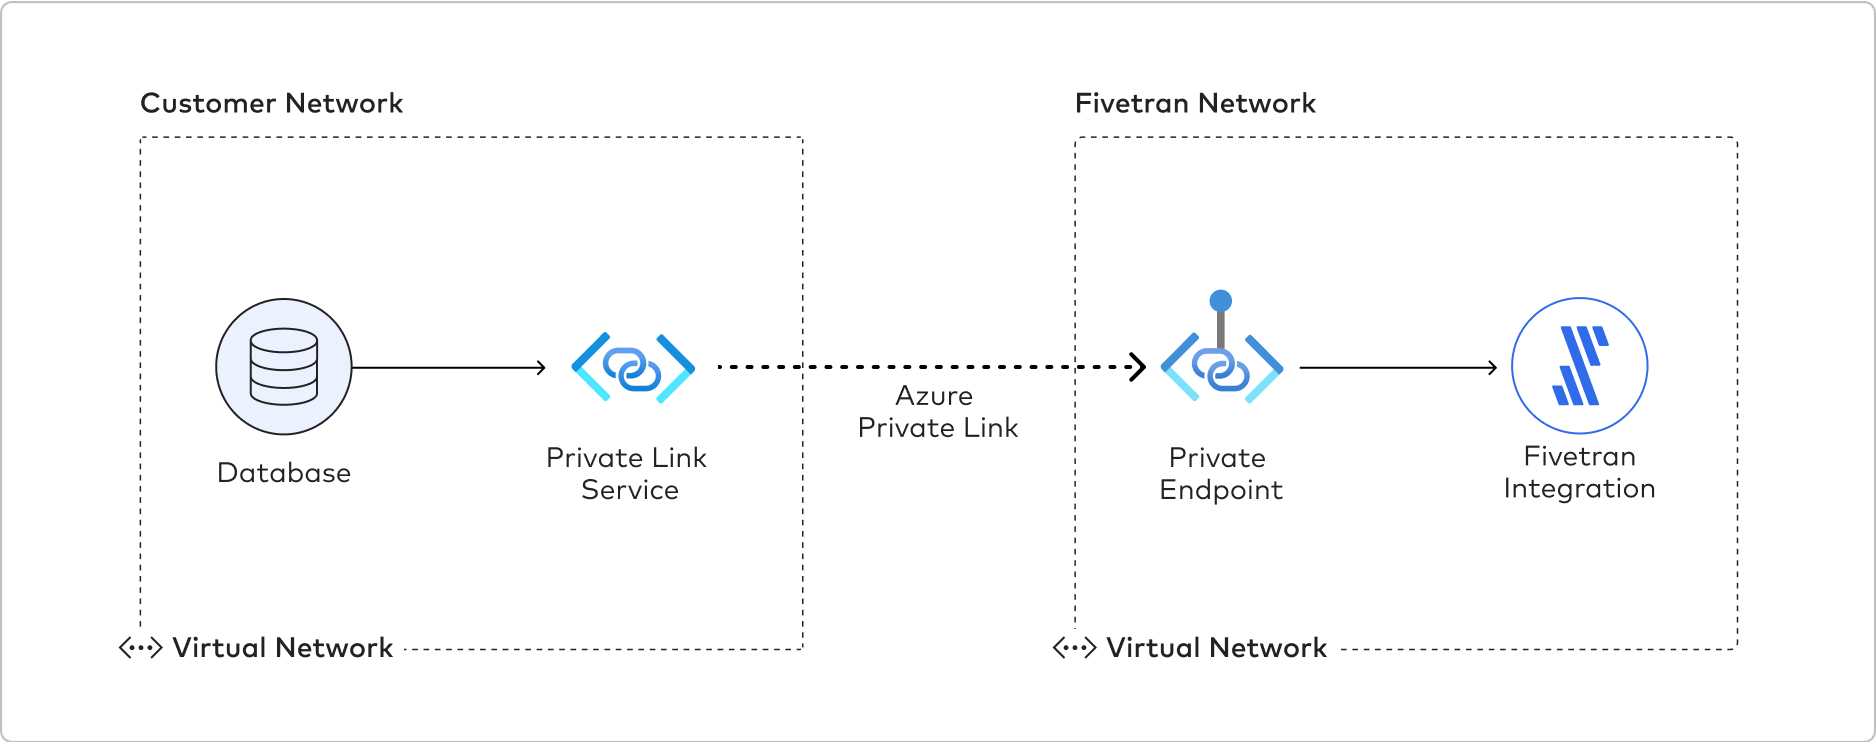 Visualization of Customer to Fivetran Network connection